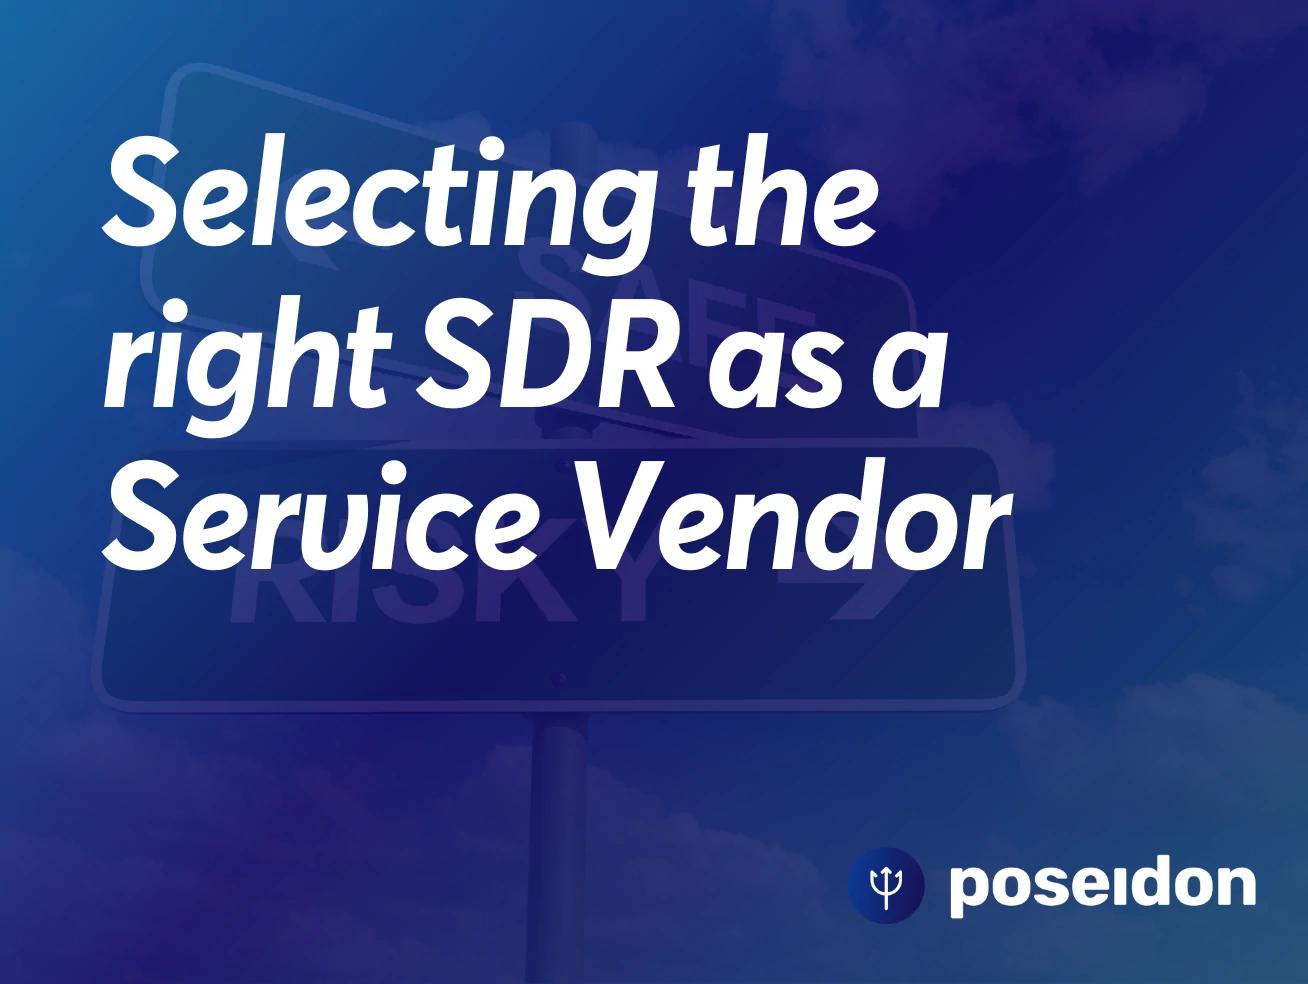 Selecting the right SDR as a Service Vendor